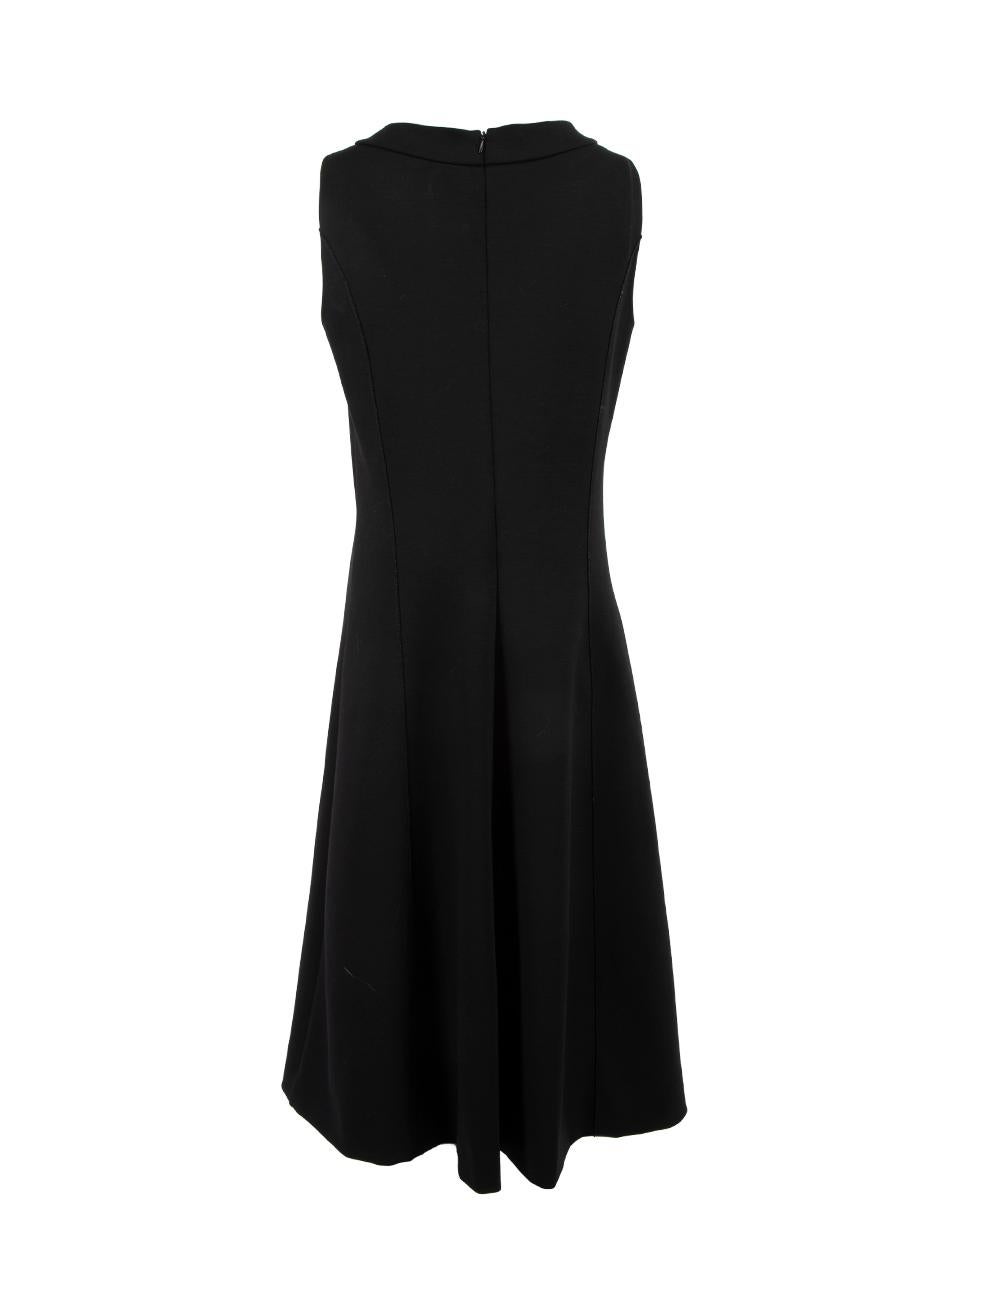 Yves Saint Laurent Black Autumn 2010 Wool Sleeveless Shift Midi Dress Size M In Excellent Condition For Sale In London, GB